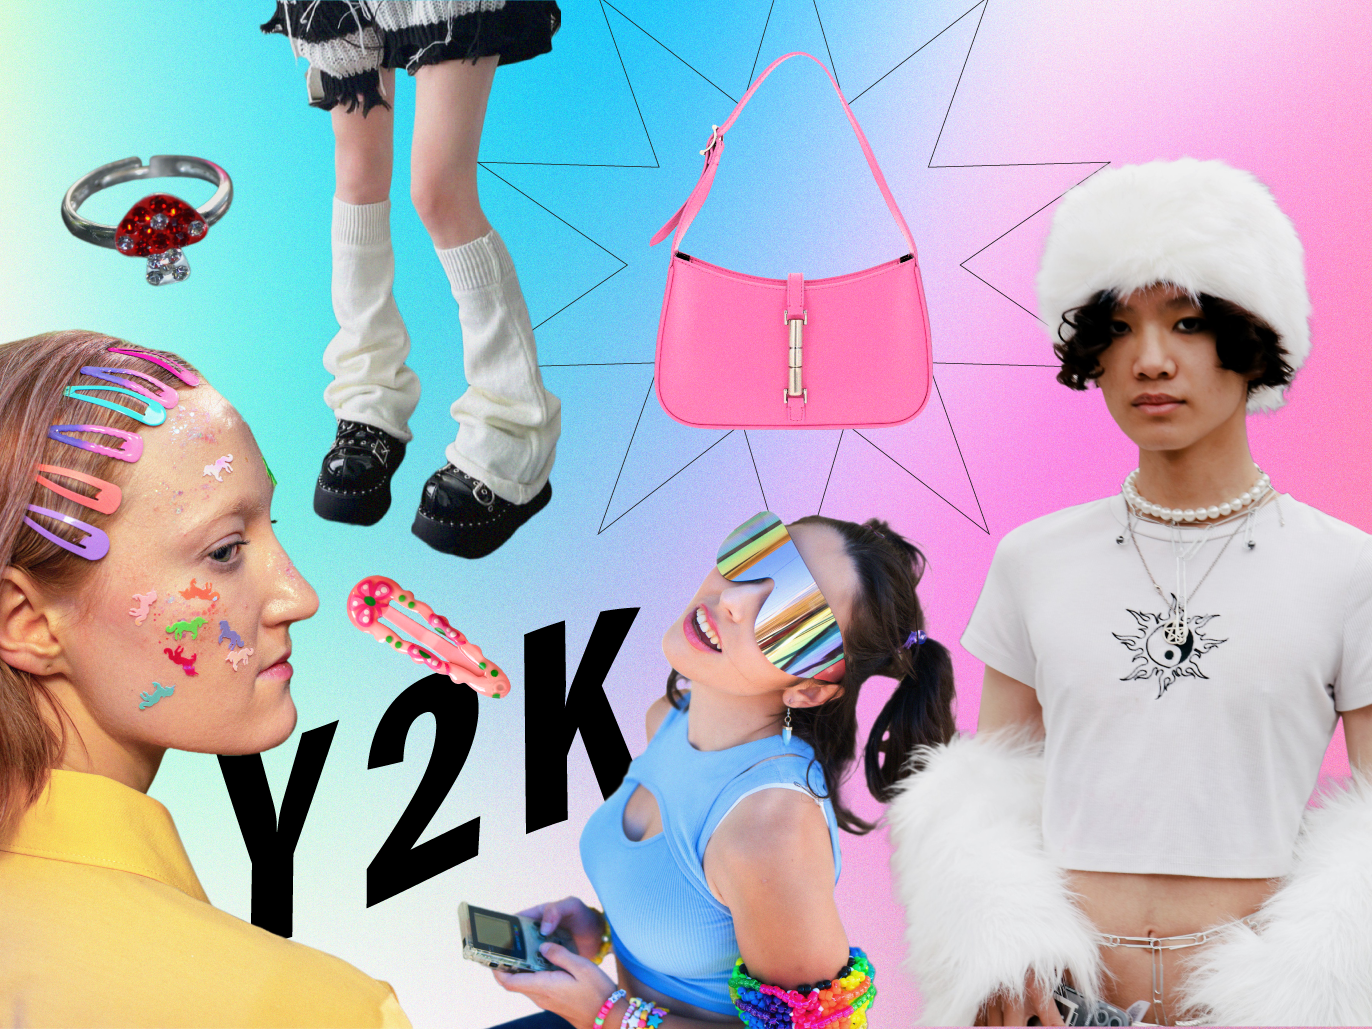 Recent Vintage: Why Y2K-Era Clothing Is Blowing Up